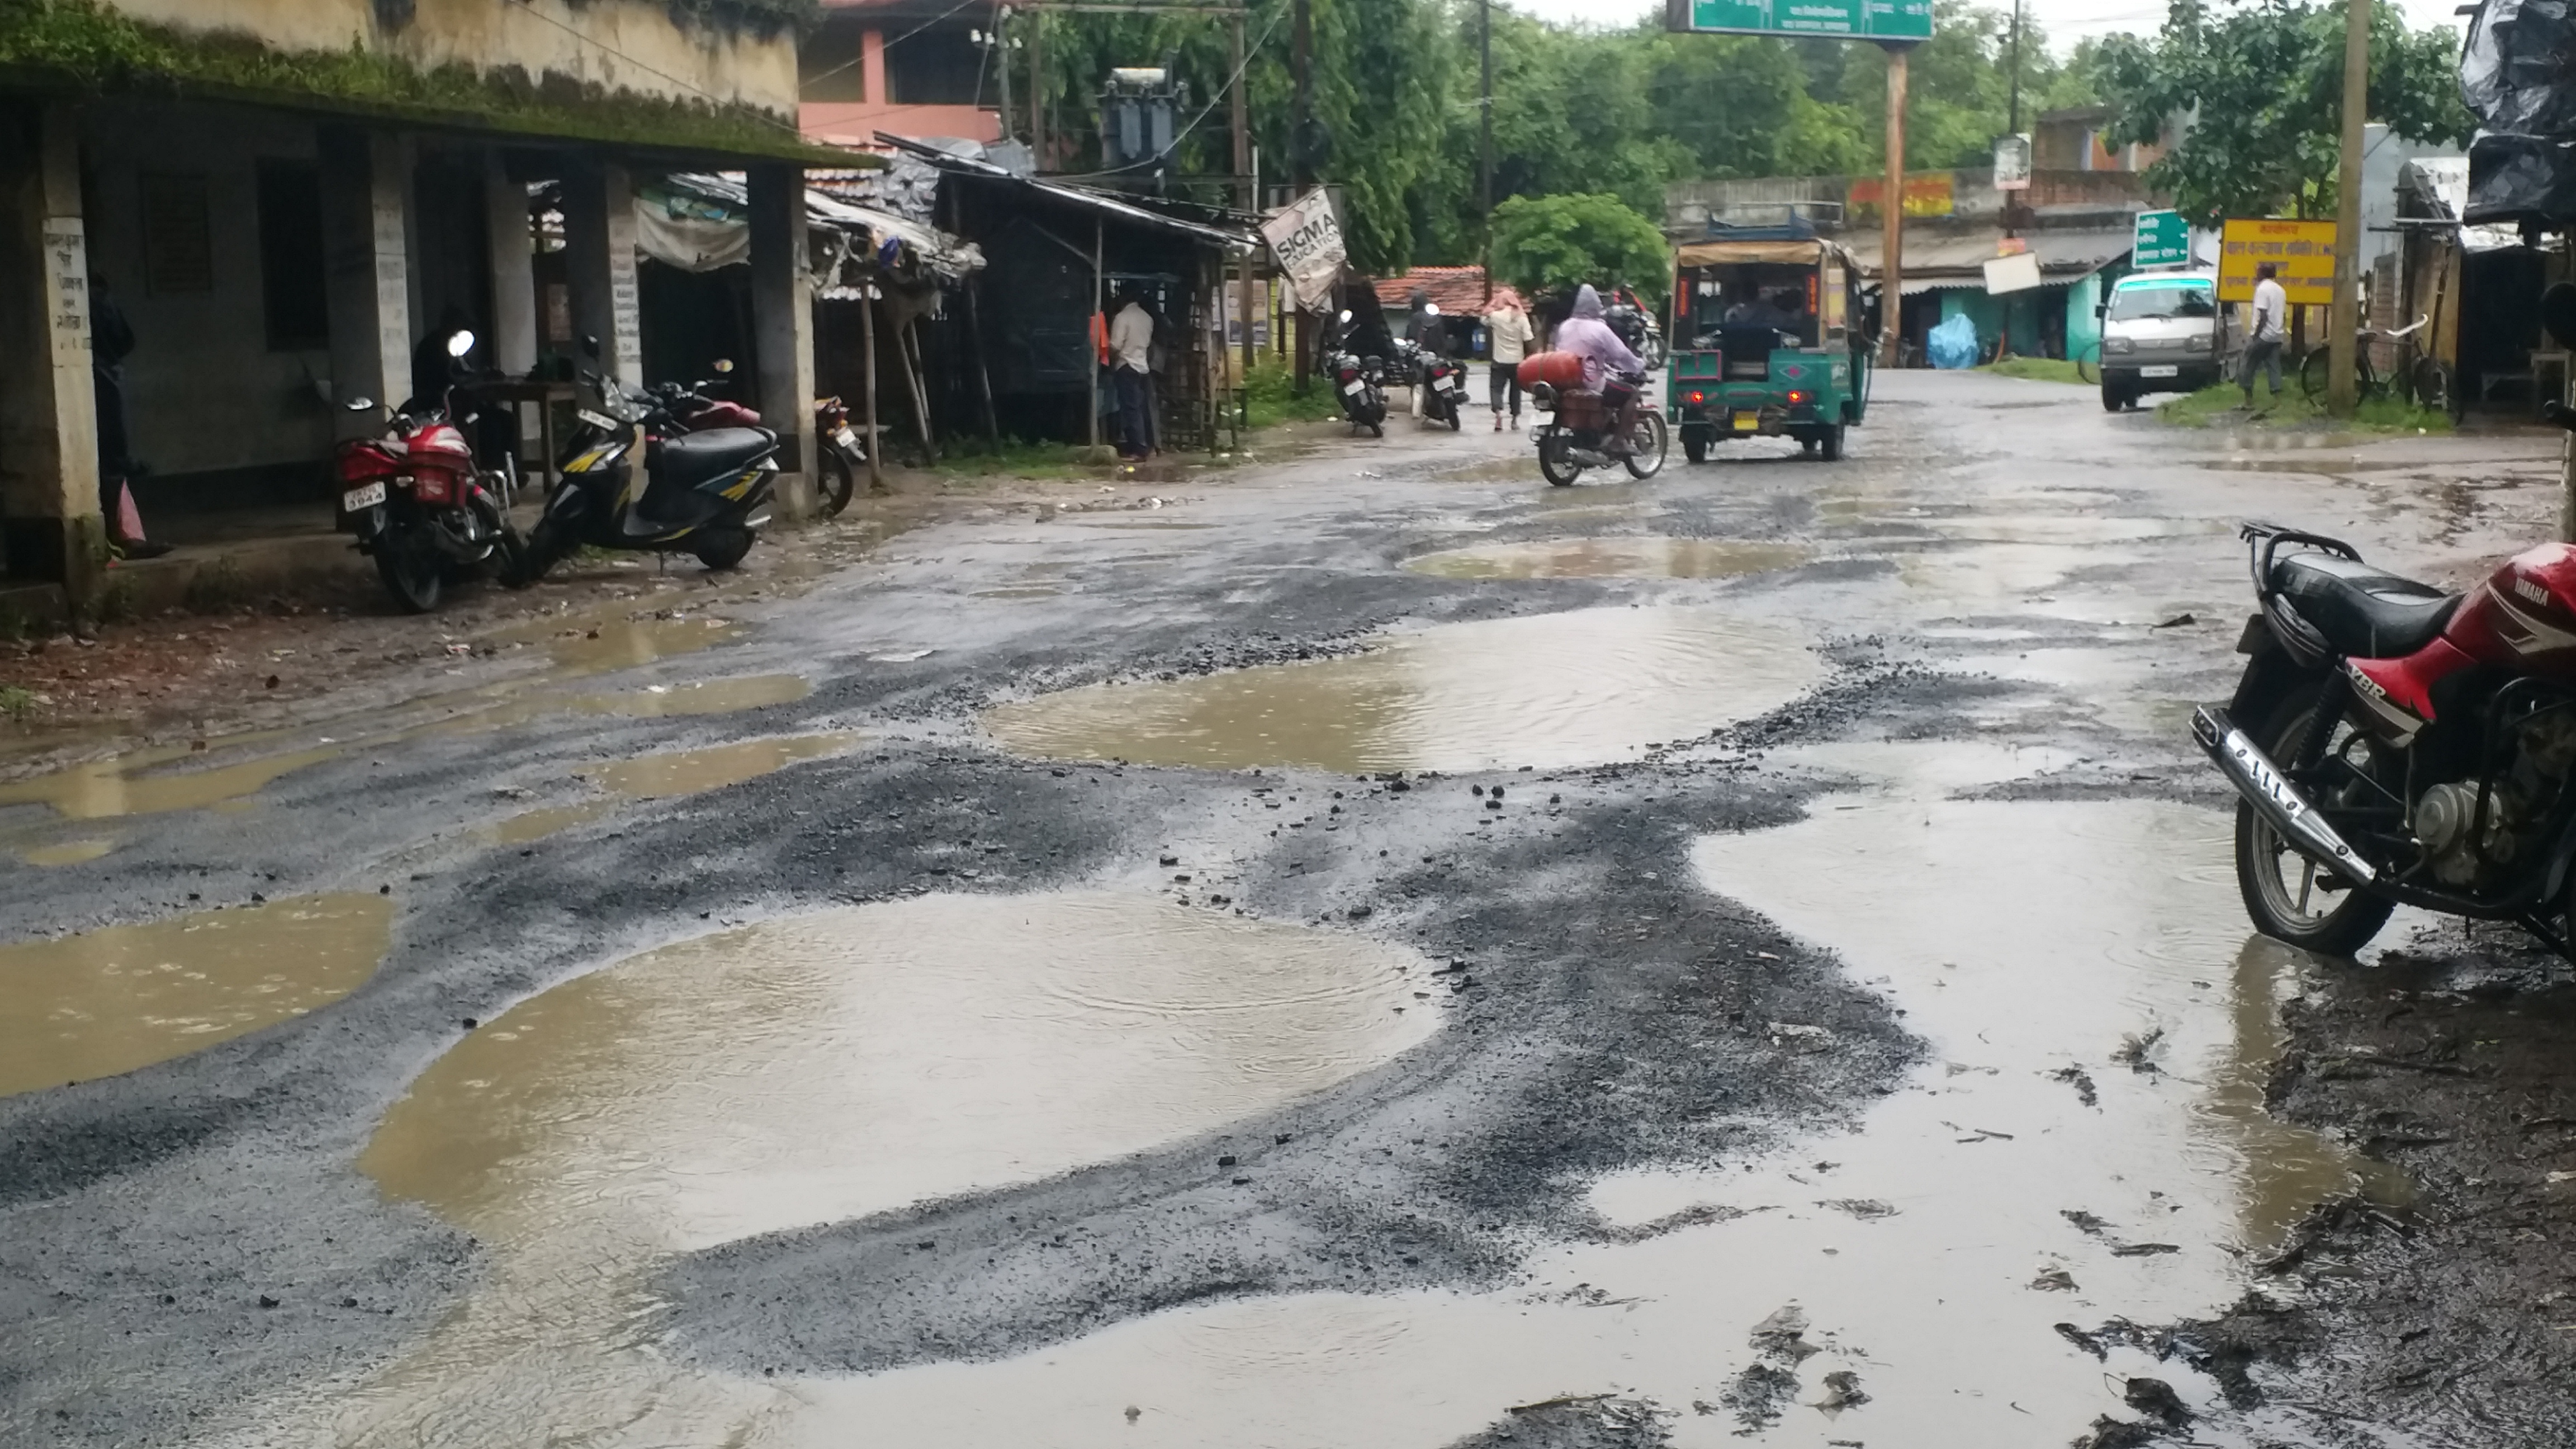 old court complex road shabby due to rain in Jamtara